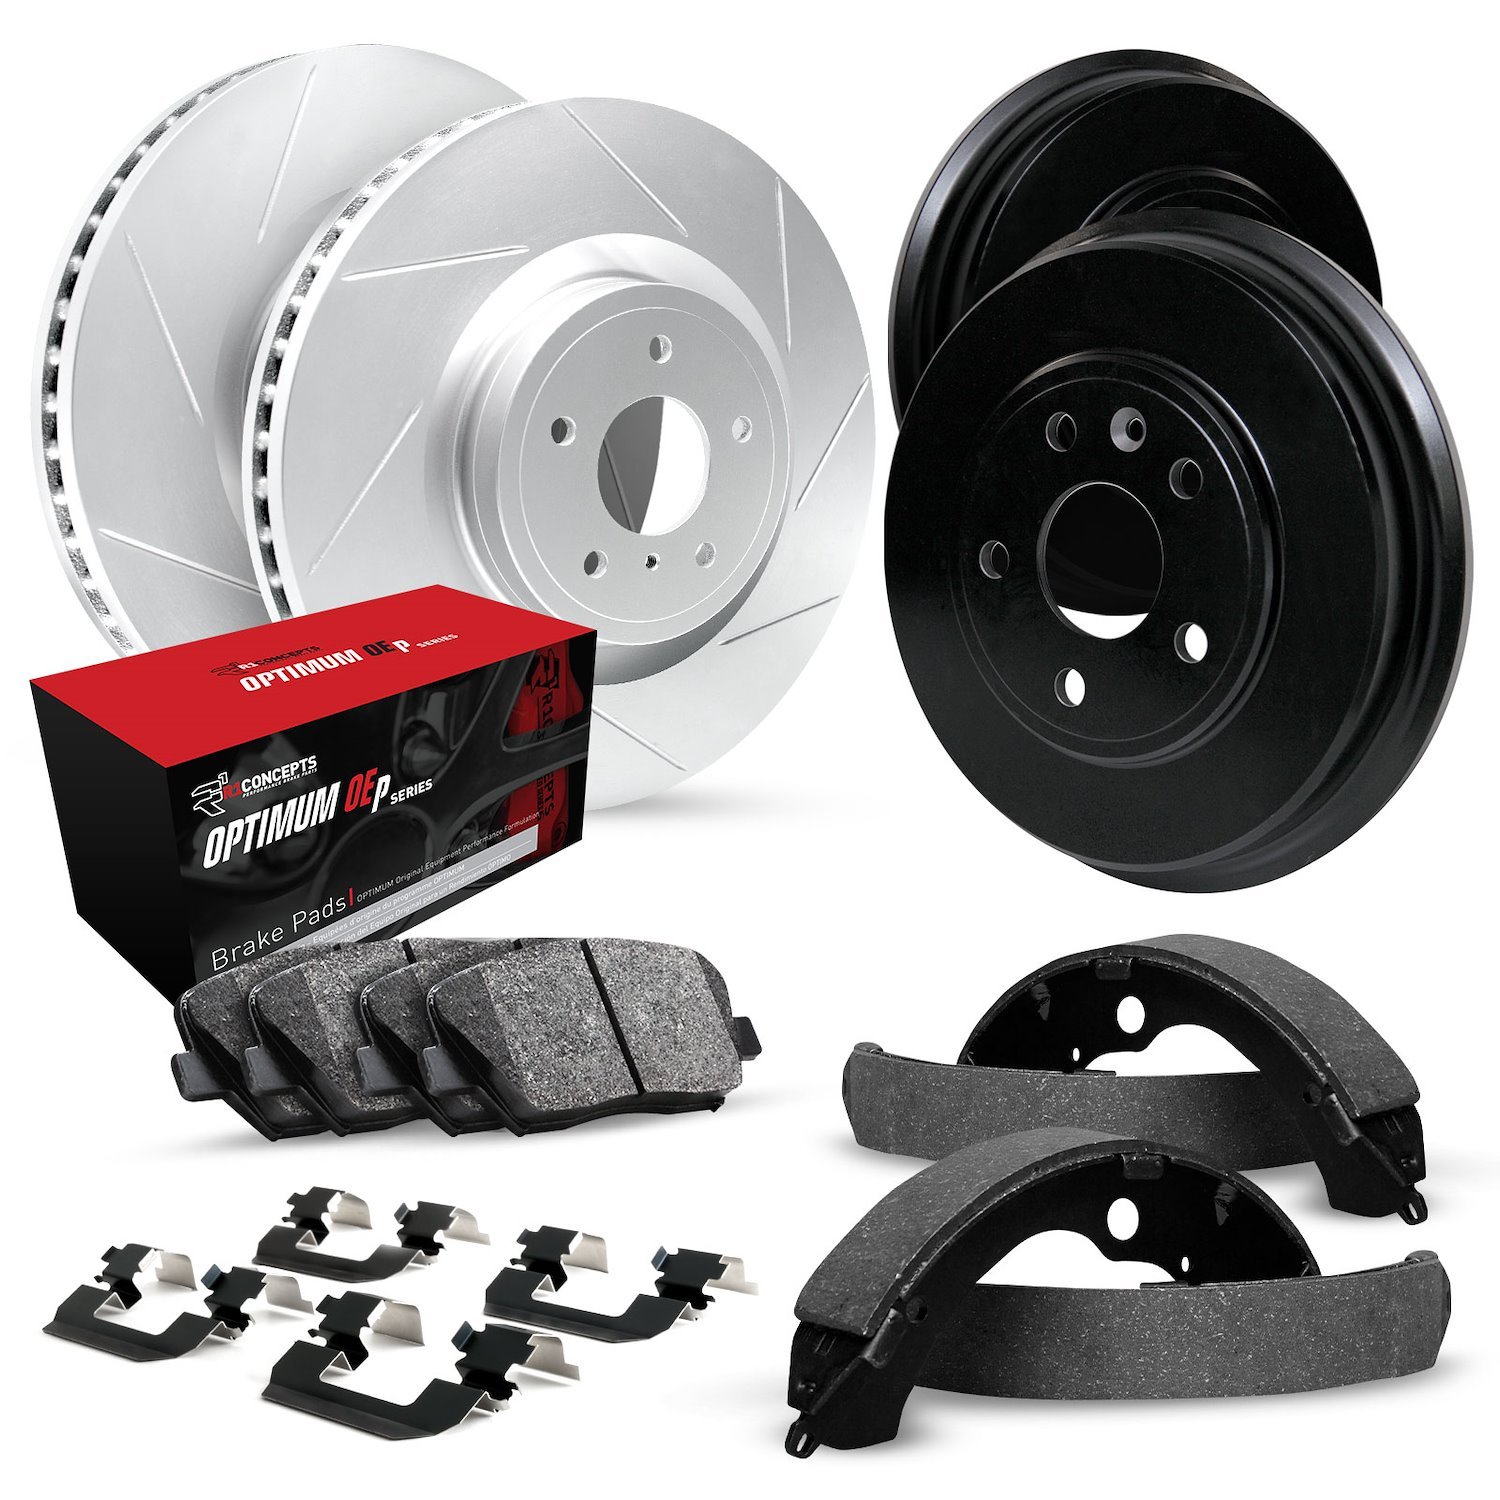 GEO-Carbon Slotted Brake Rotor & Drum Set w/Optimum OE Pads, Shoes, & Hardware, 1997-1999 GM, Position: Front & Rear